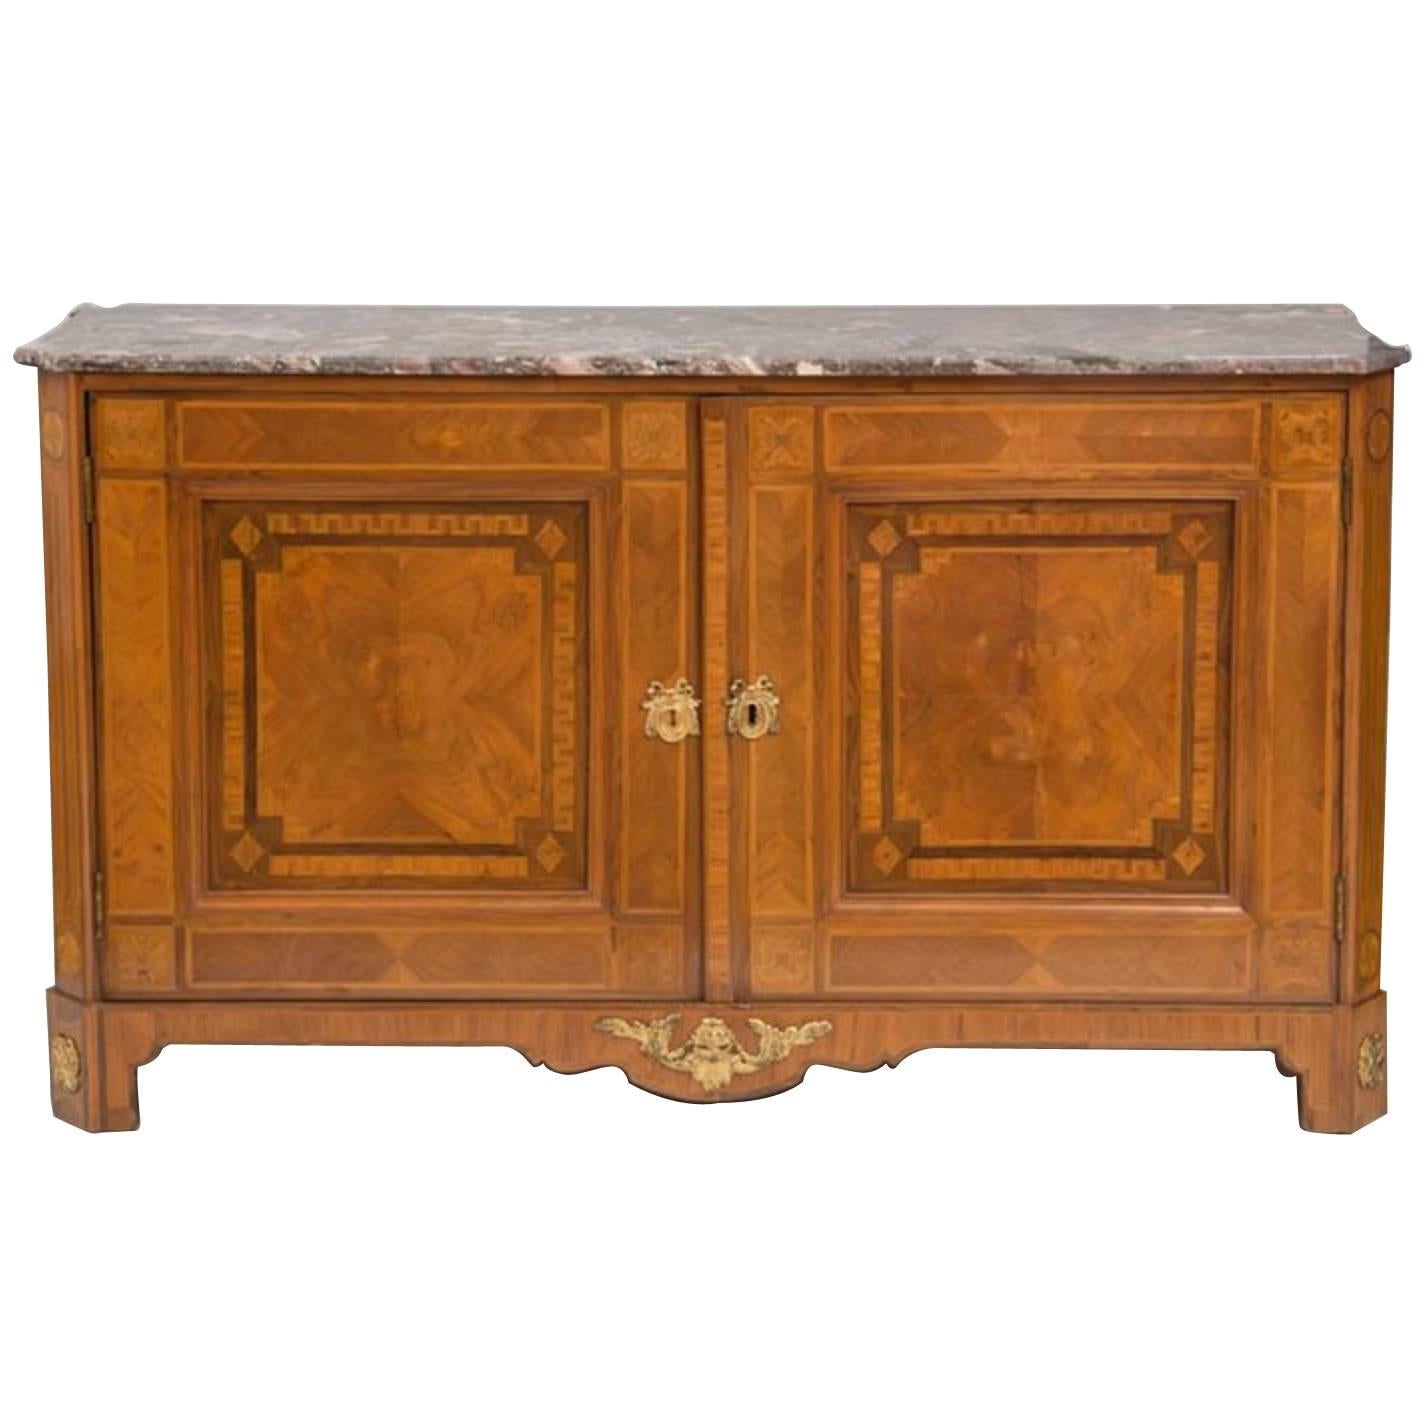 Fine Louis XVI Marquetry Inlaid Bronze Mounted Marble-Top Cabinet